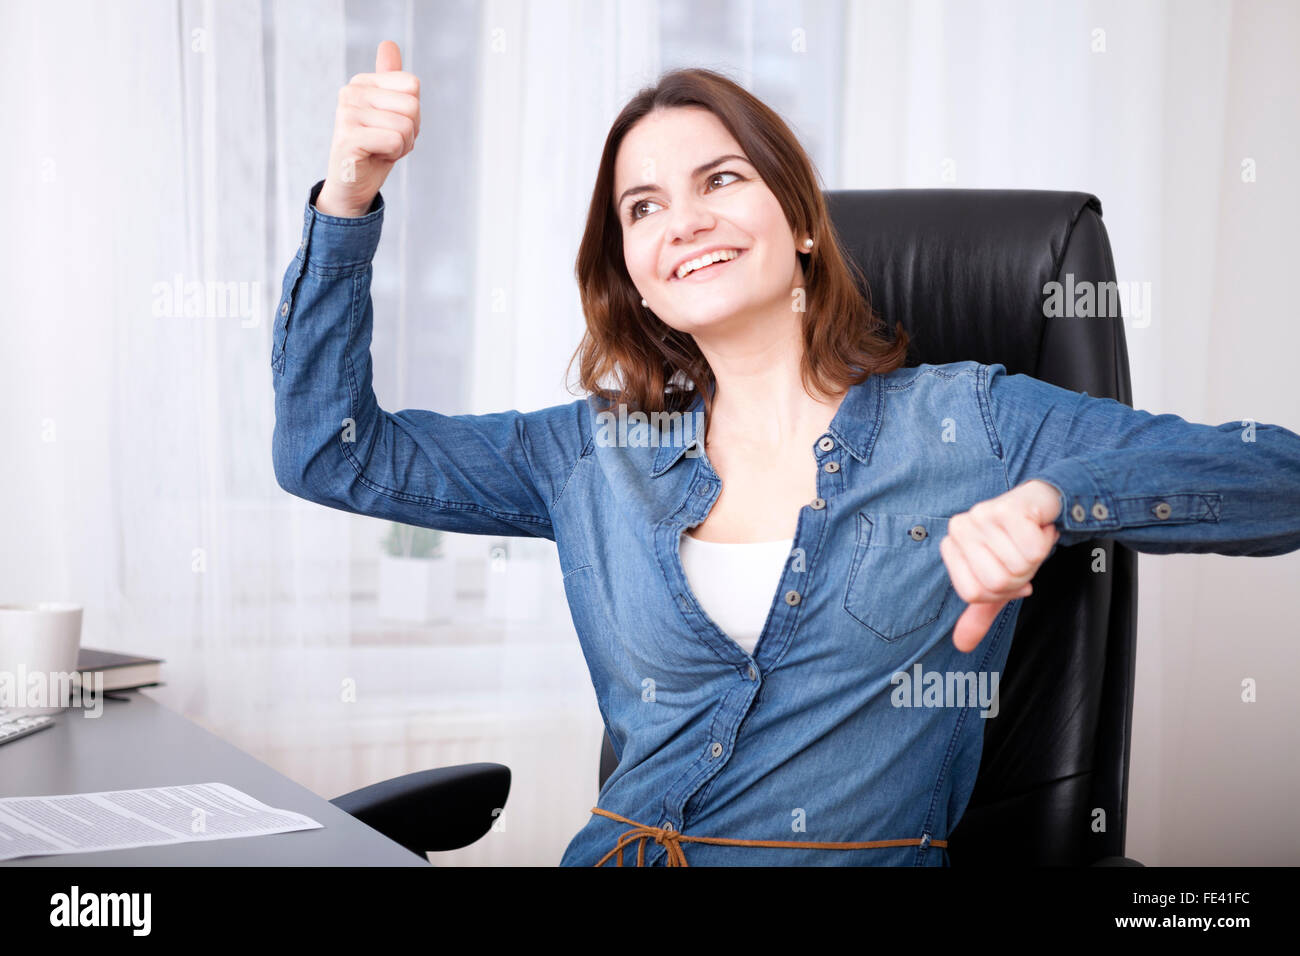 Undecided businesswoman laughing playfully and giving a thumbs up and down gesture simultaneously Stock Photo